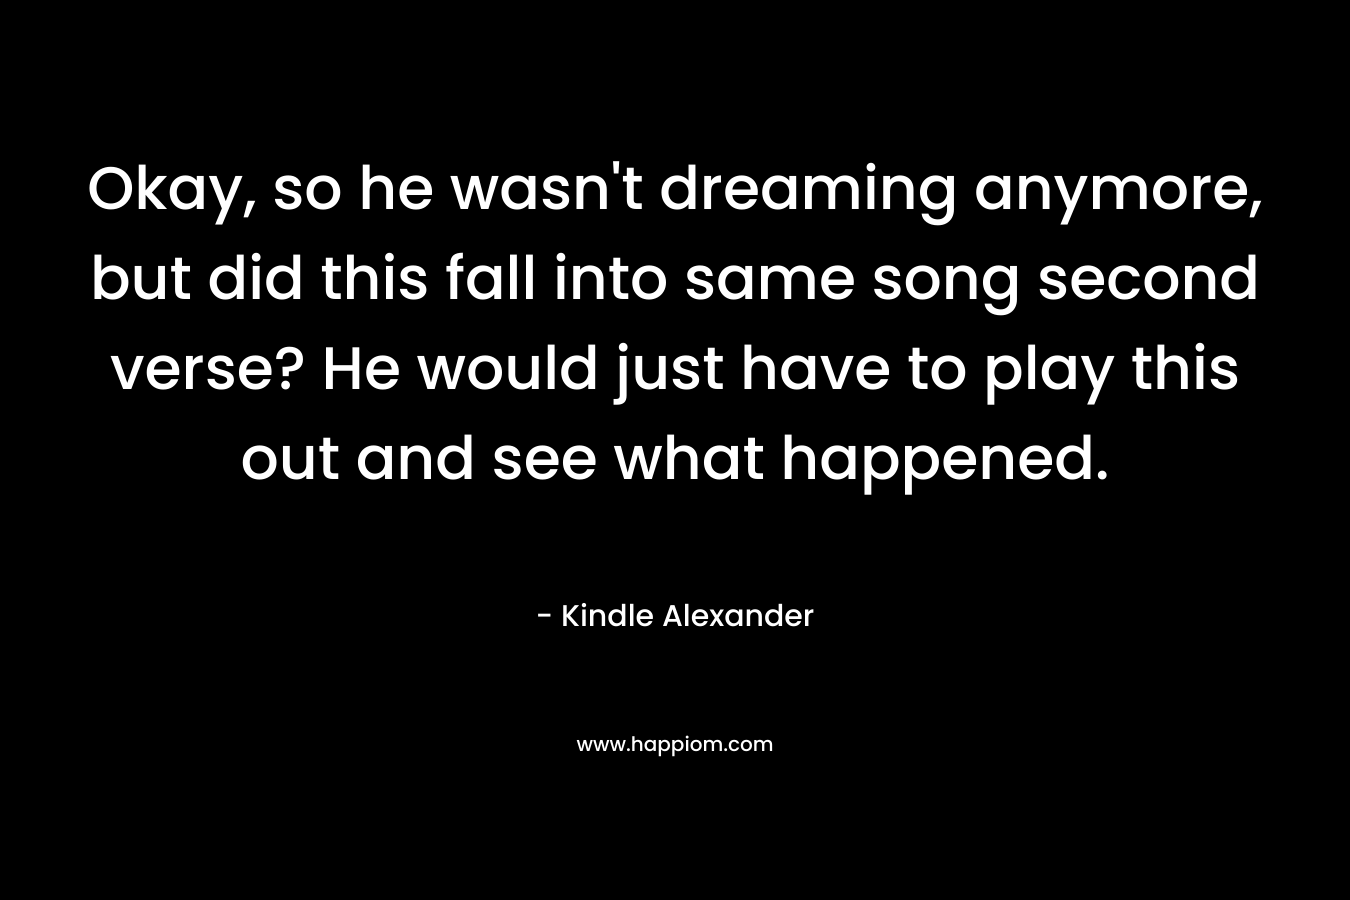 Okay, so he wasn’t dreaming anymore, but did this fall into same song second verse? He would just have to play this out and see what happened. – Kindle Alexander